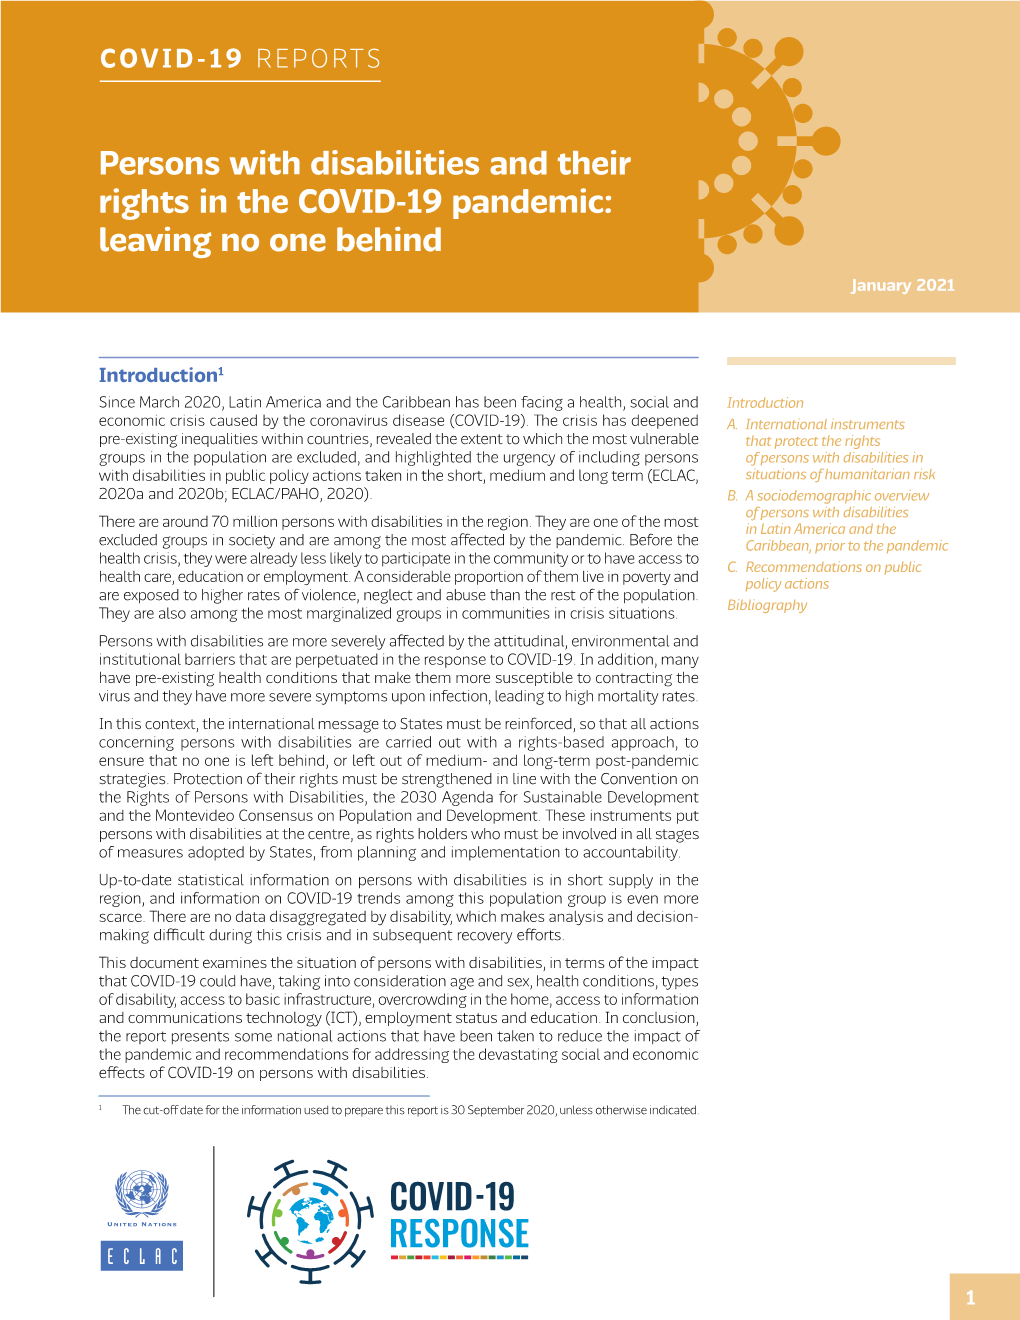 Persons with Disabilities and Their Rights in the COVID-19 Pandemic: Leaving No One Behind